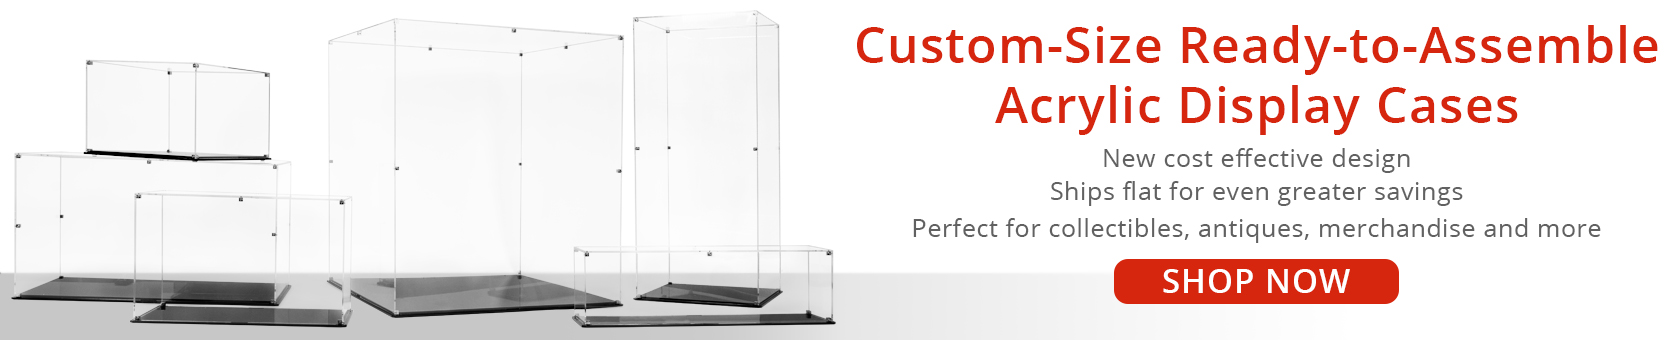 Custom-Size Ready-to-Assemble Acrylic Display Cases, Cost effective design, ships flat